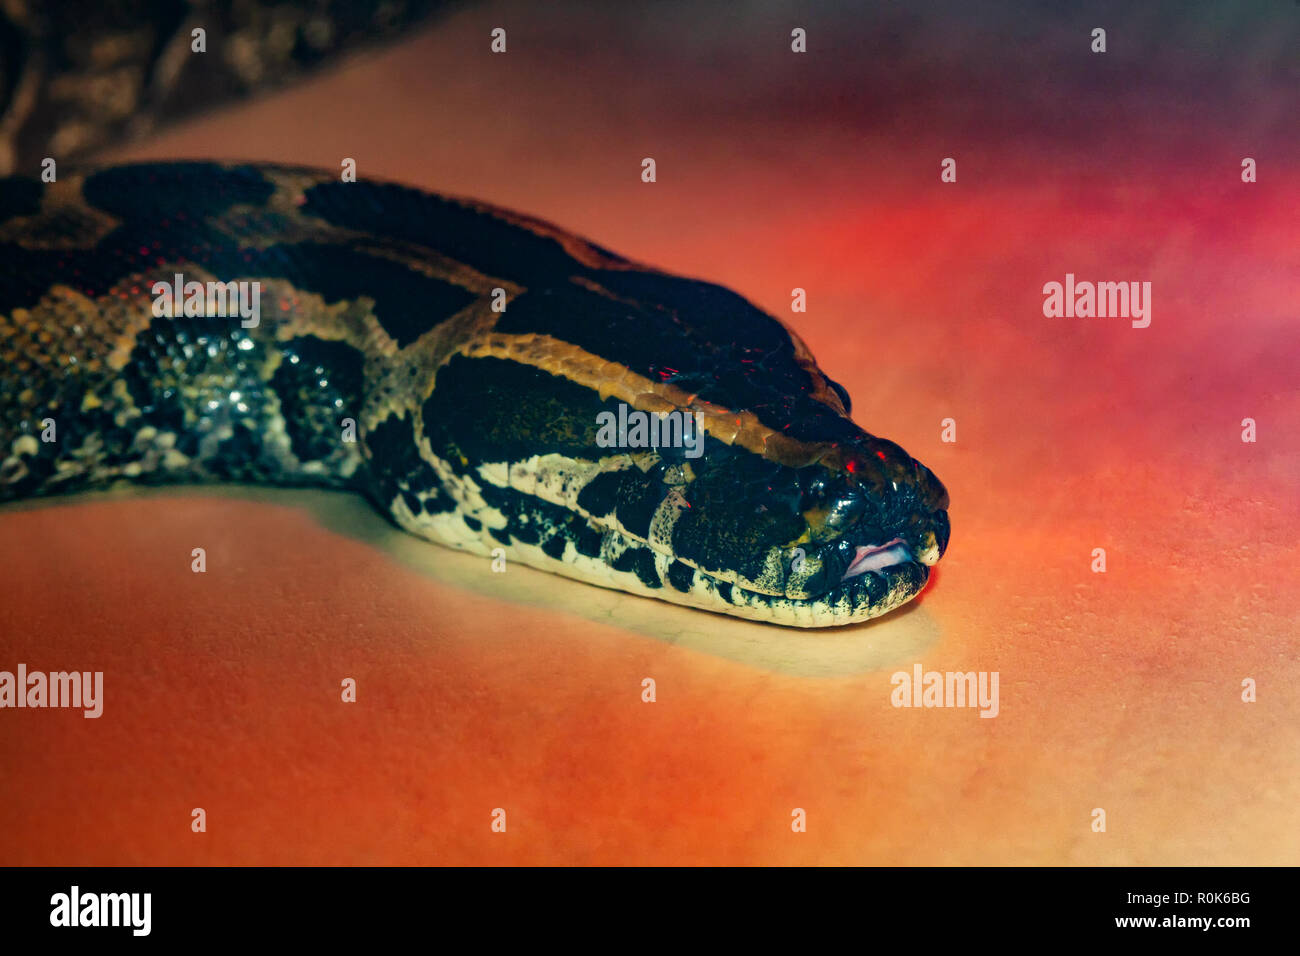 African python snake close up under red light. Stock Photo